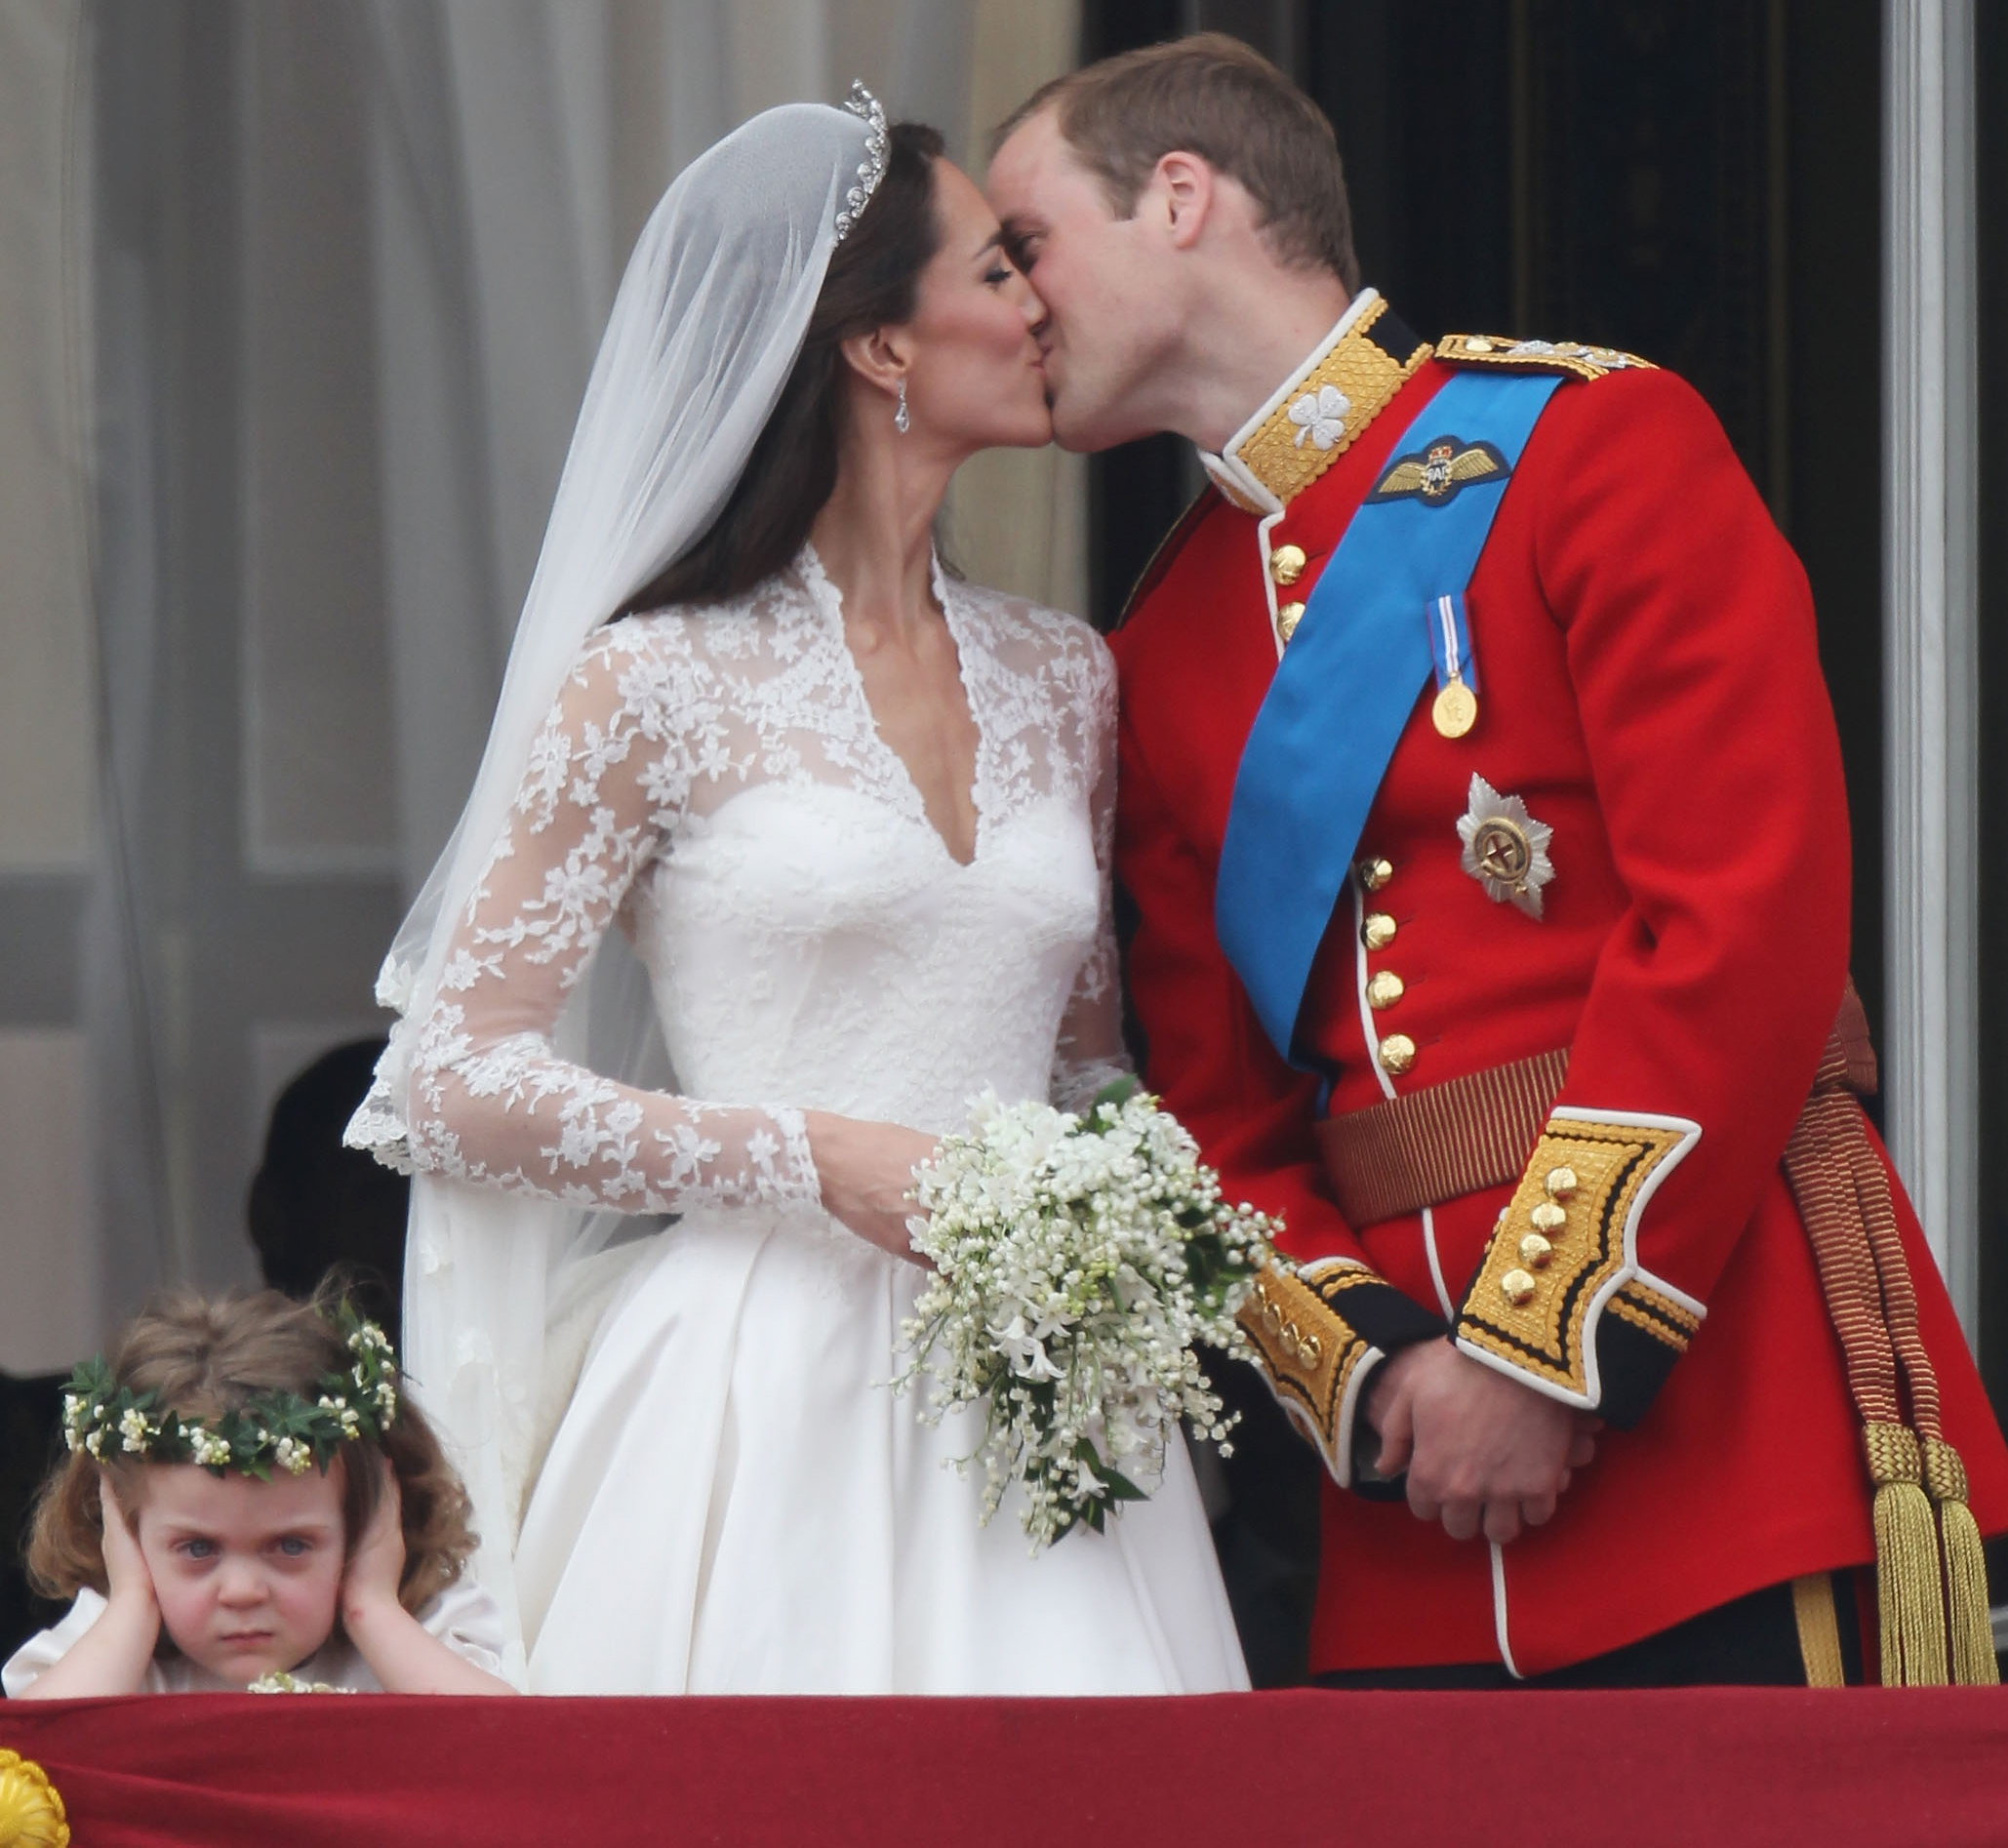 LONDON, ENGLAND - APRIL 29:  Their Royal Highnesses Prince William, Duke of Cambridge and Catherine, Duchess of Cambridge kiss on the balcony at Buckingham Palace on April 29, 2011 in London, England. The marriage of the second in line to the British throne was led by the Archbishop of Canterbury and was attended by 1900 guests, including foreign Royal family members and heads of state. Thousands of well-wishers from around the world have also flocked to London to witness the spectacle and pageantry of the Royal Wedding.  (Photo by Peter Macdiarmid/Getty Images) *** Local Caption *** Prince William;Duke of Cambridge;Catherine;Duchess of Cambridge;